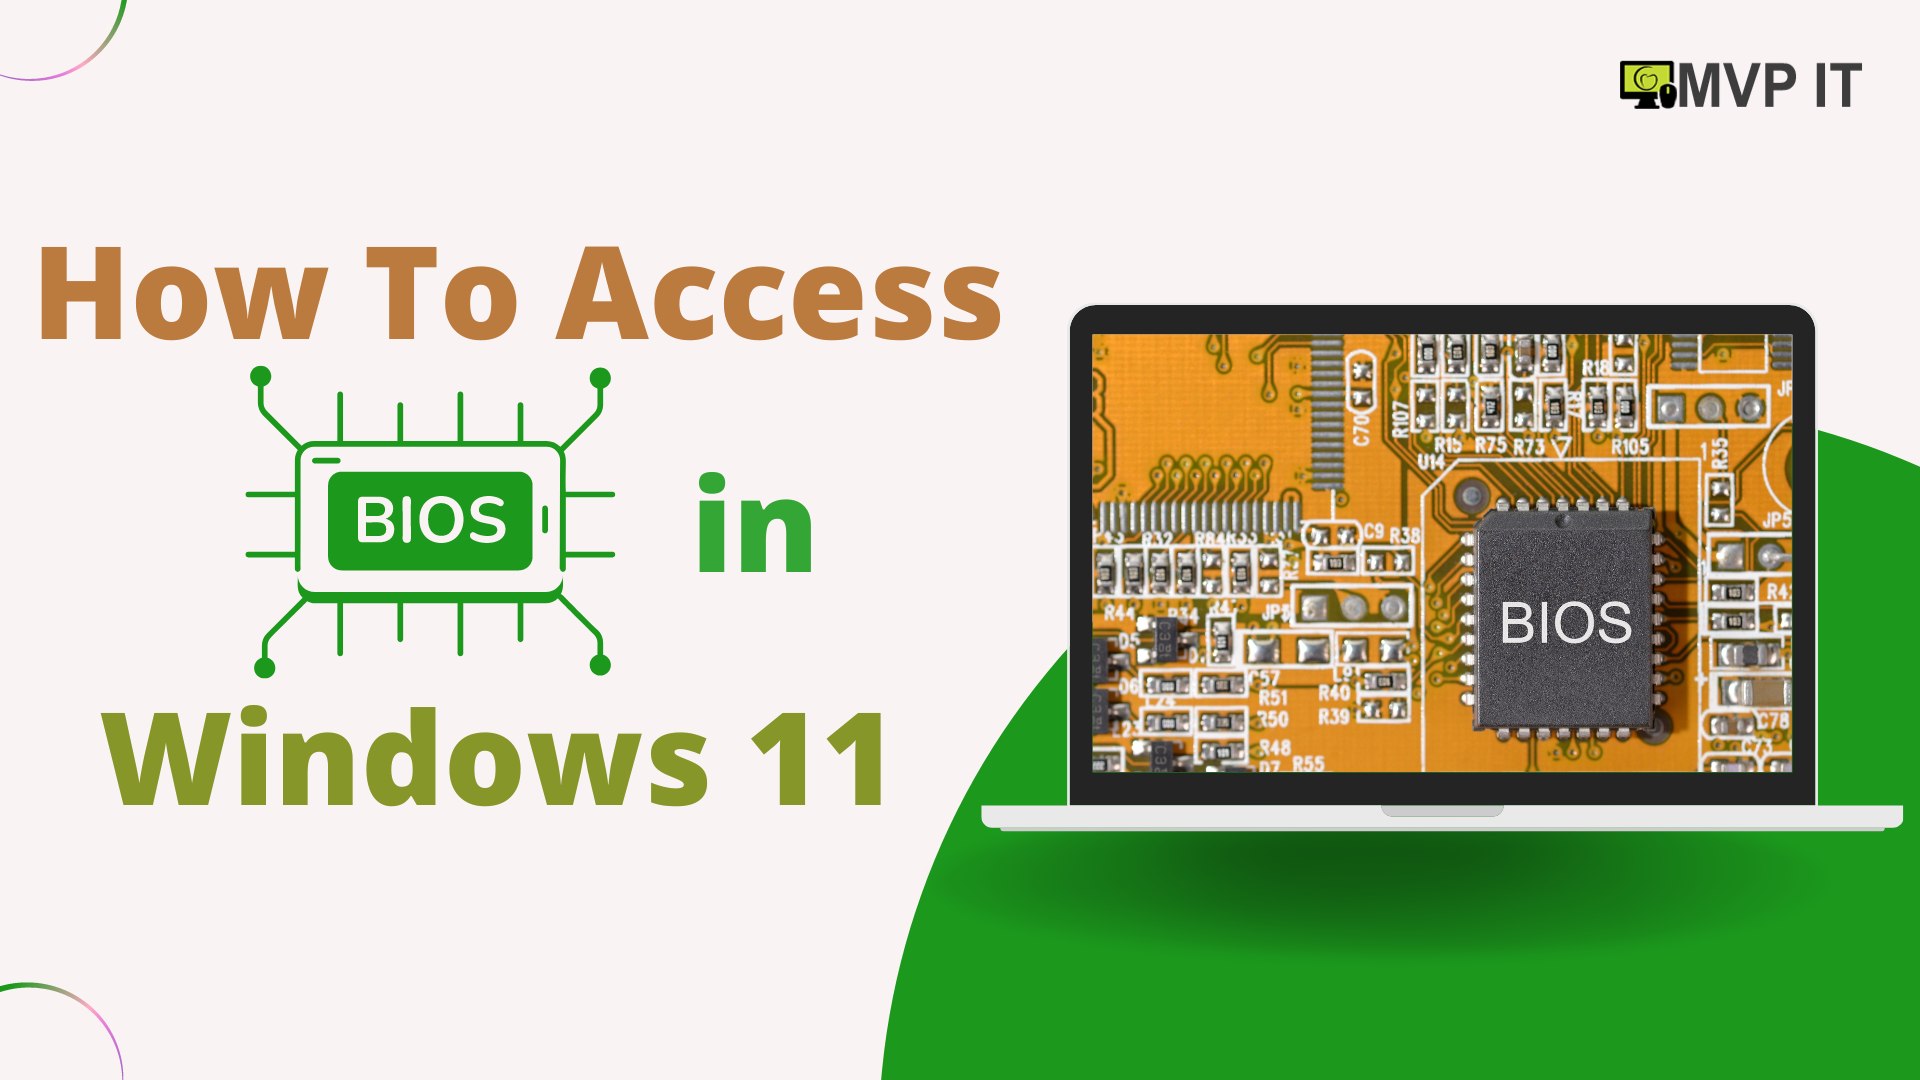 How To Access BIOS in Windows 11